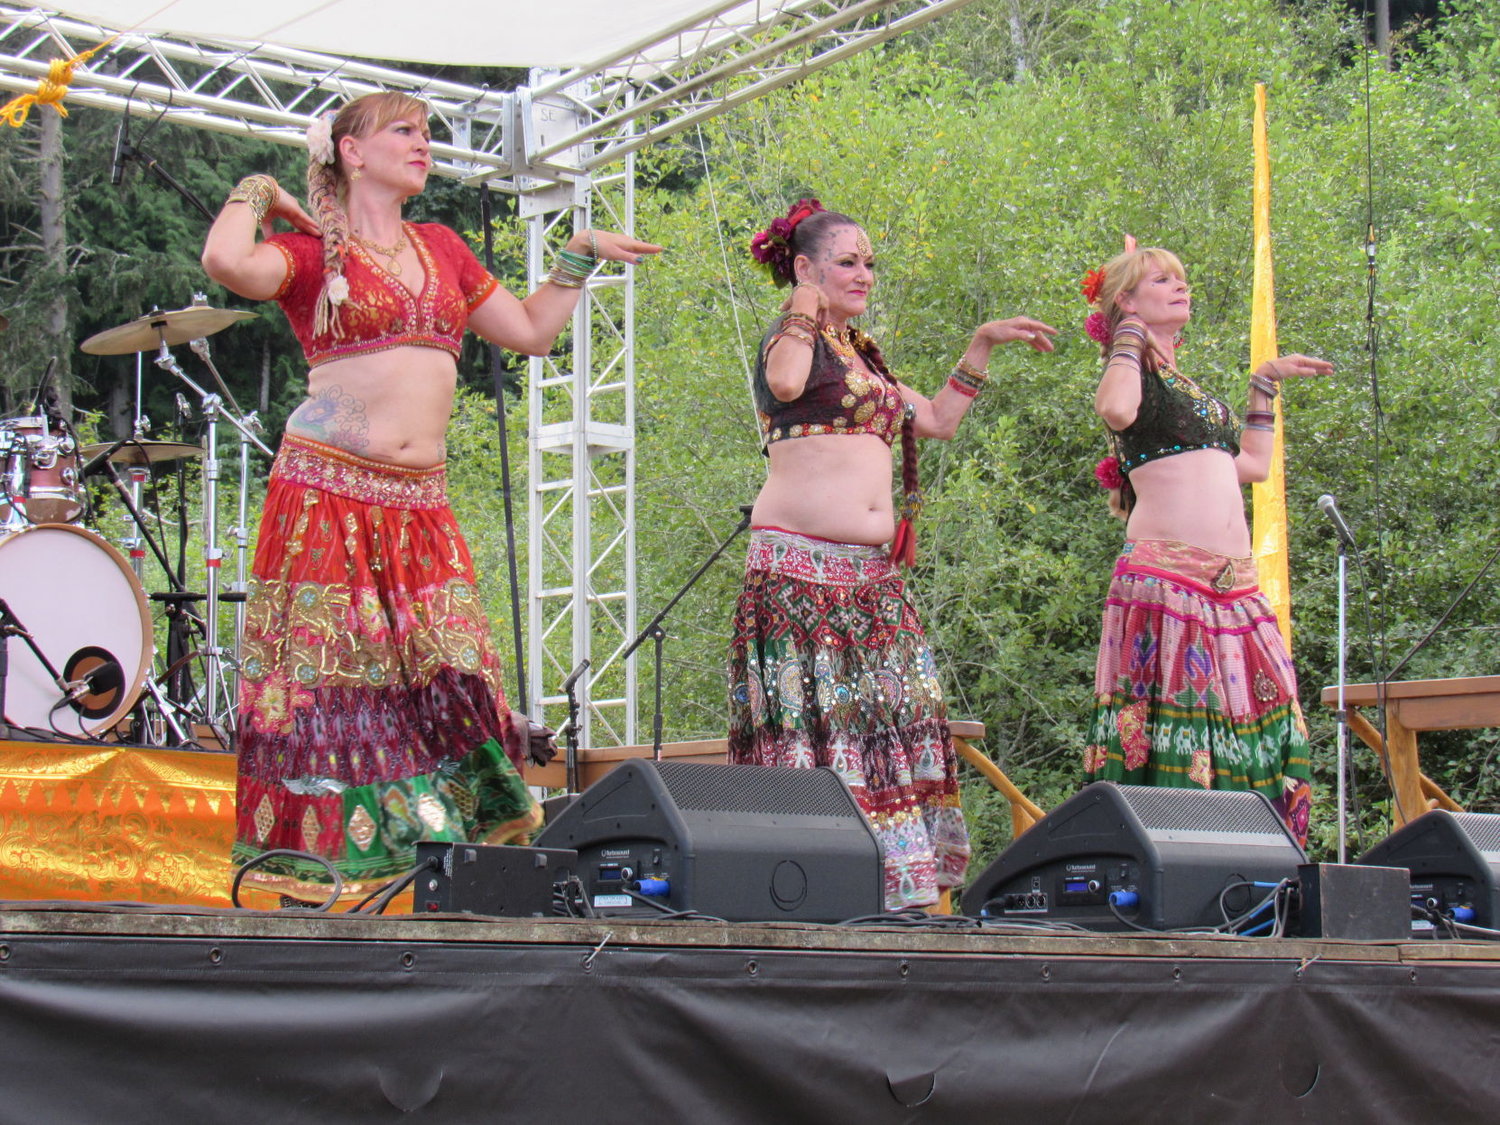  Traveling from Port Angeles to Quilcene, the Shula Azhar belly dancers showed their moves. Leader photos by Jimmy Hall